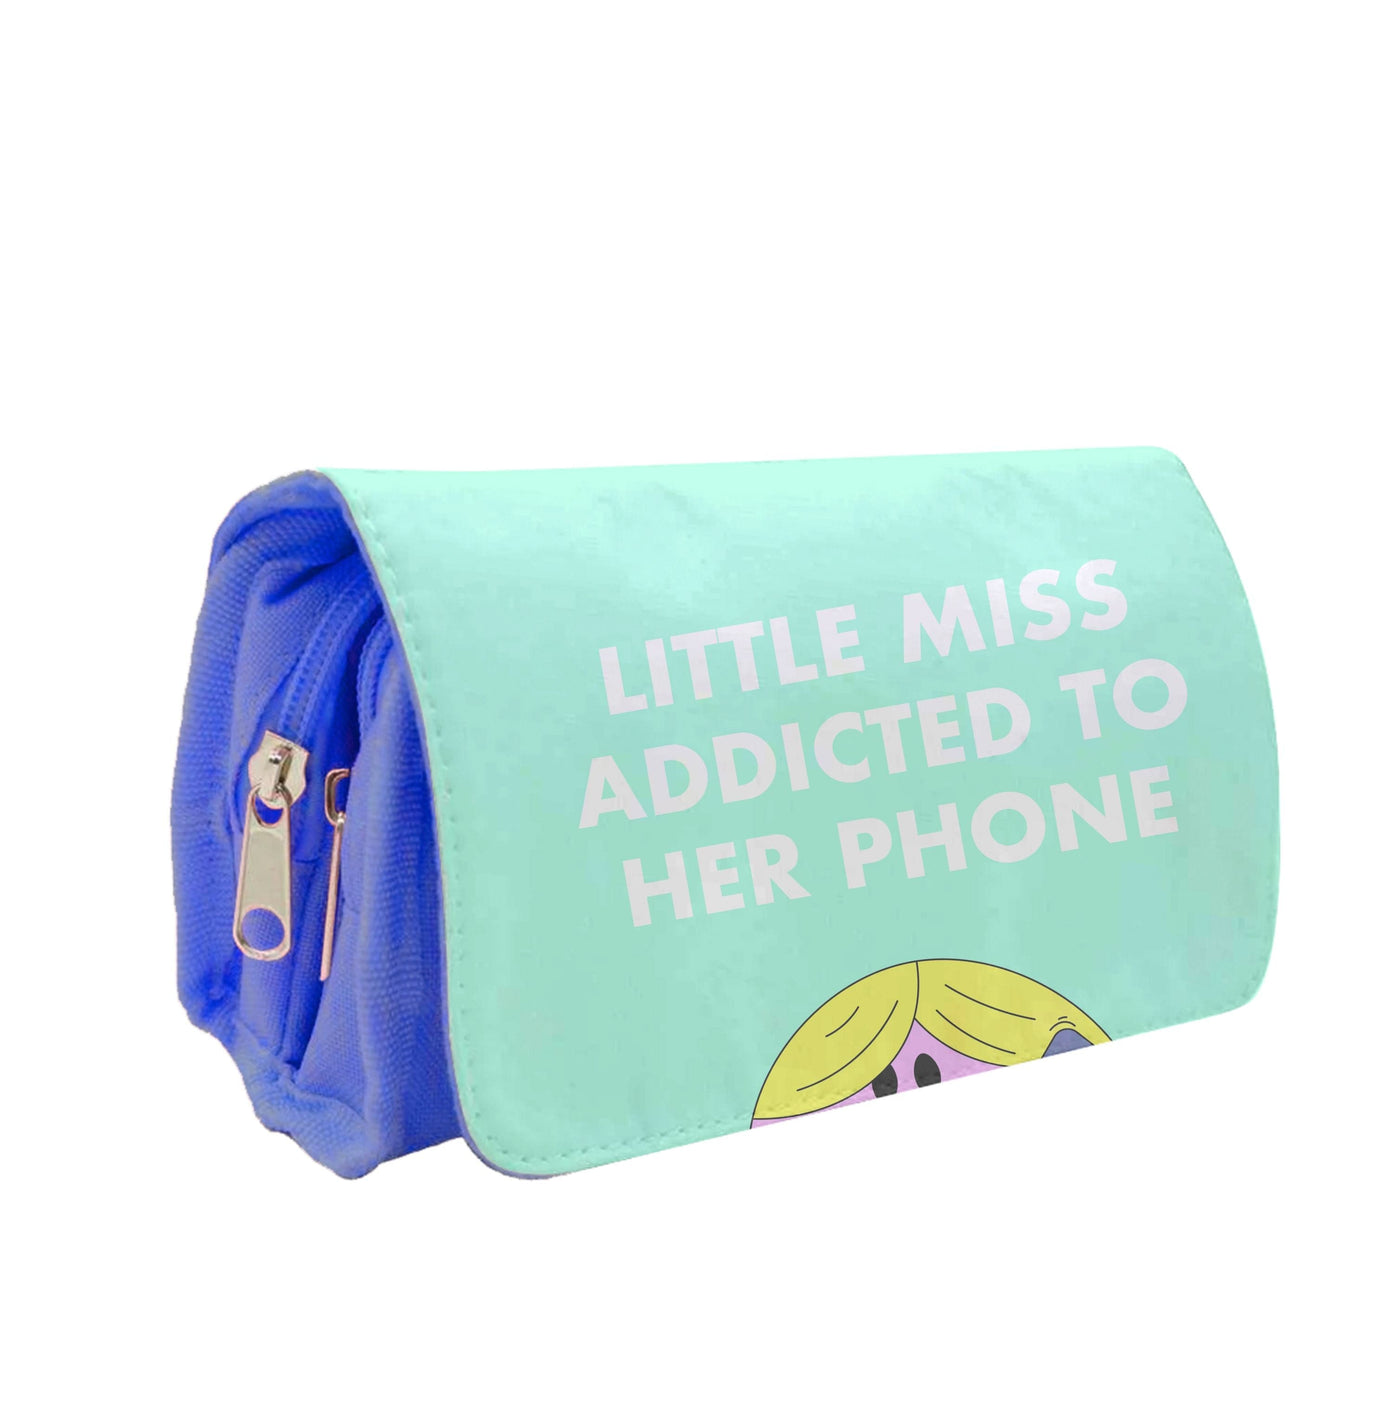 Little Miss Addicted To Her Phone - Aesthetic Quote Pencil Case